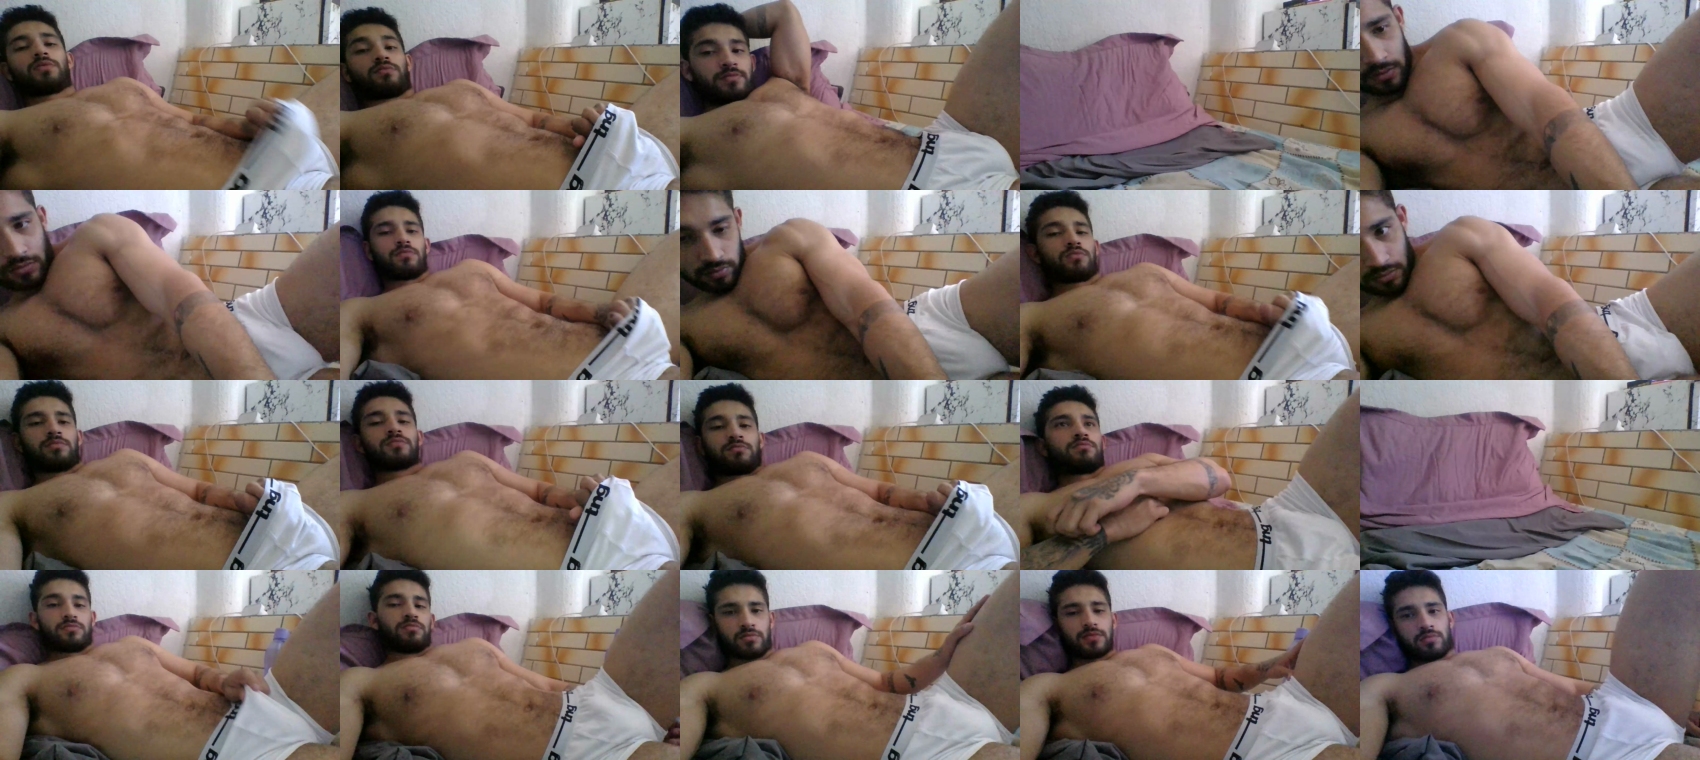 macho_fit1  18-11-2022 Recorded Video yummy